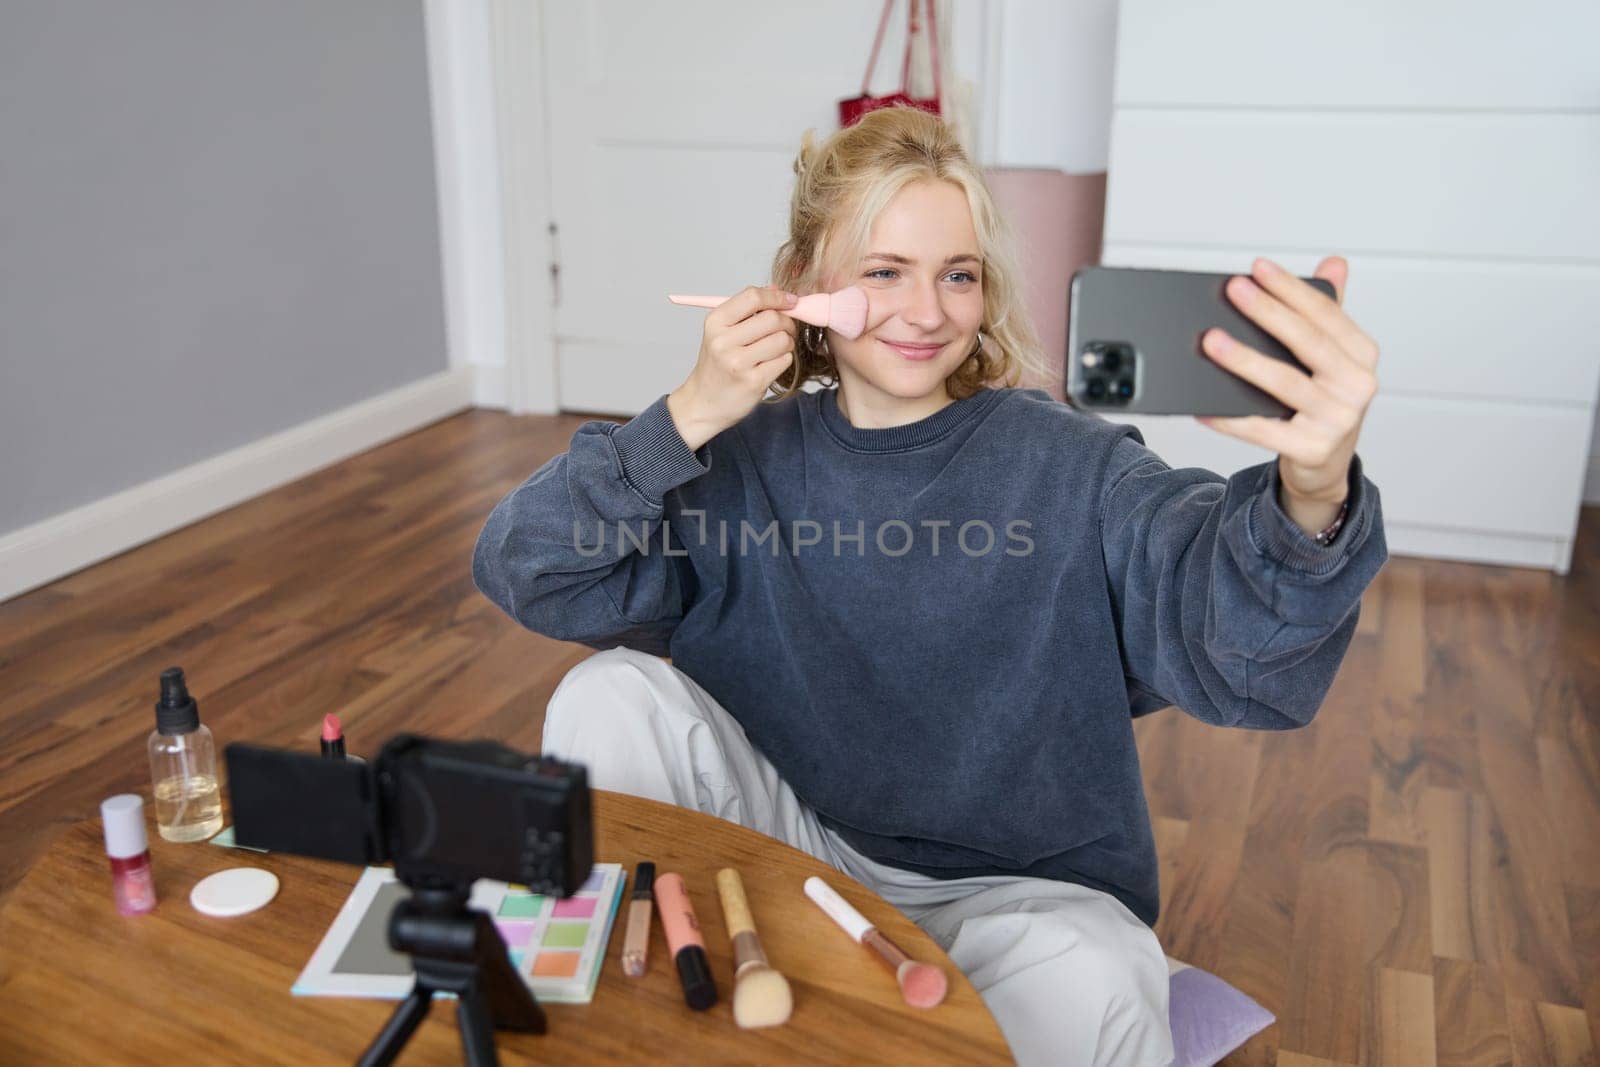 Portrait of beautiful blond girl doing makeup on camera, recording vlog using digital camera and live stream on mobile phone app, chatting with audience.